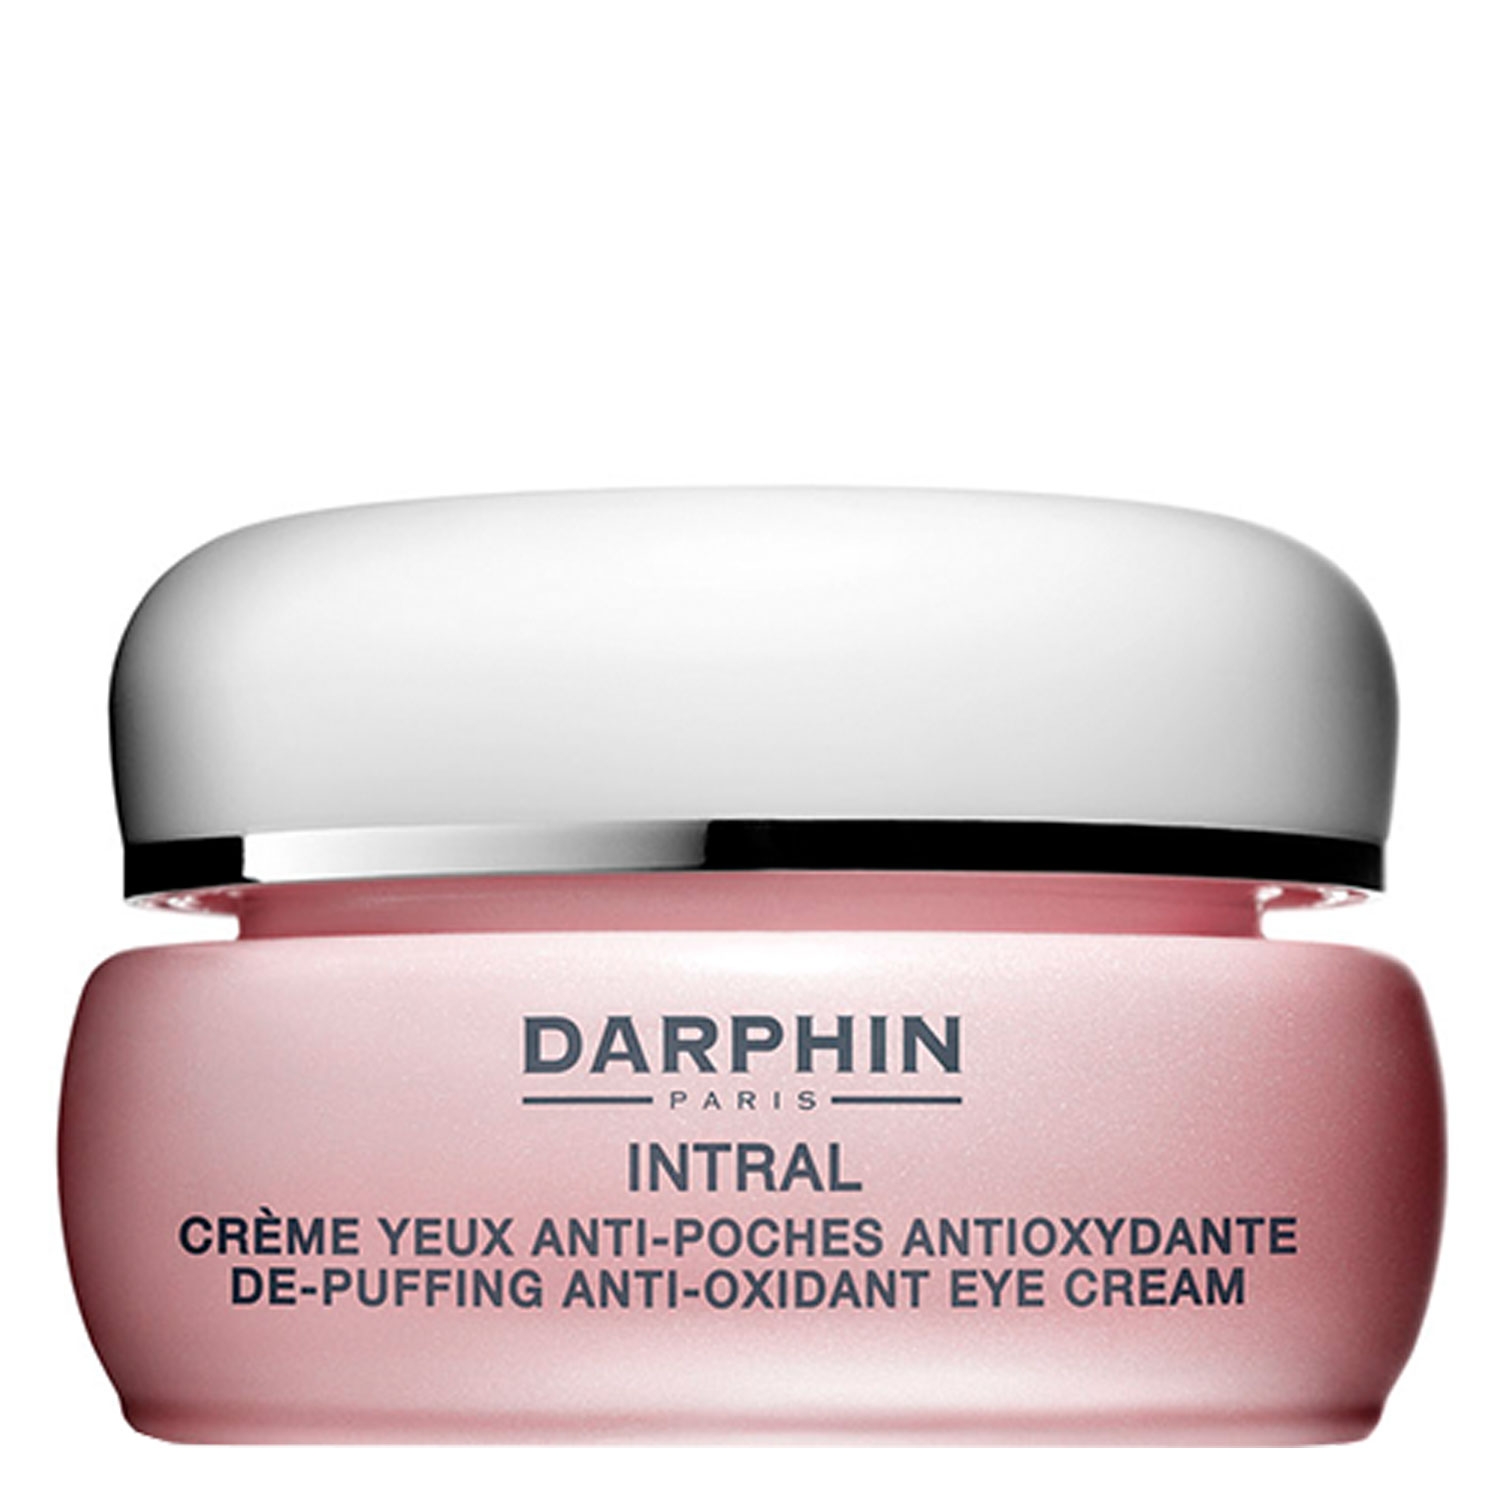 Product image from INTRAL - De-Puffing Anti-Oxidant Eye Cream